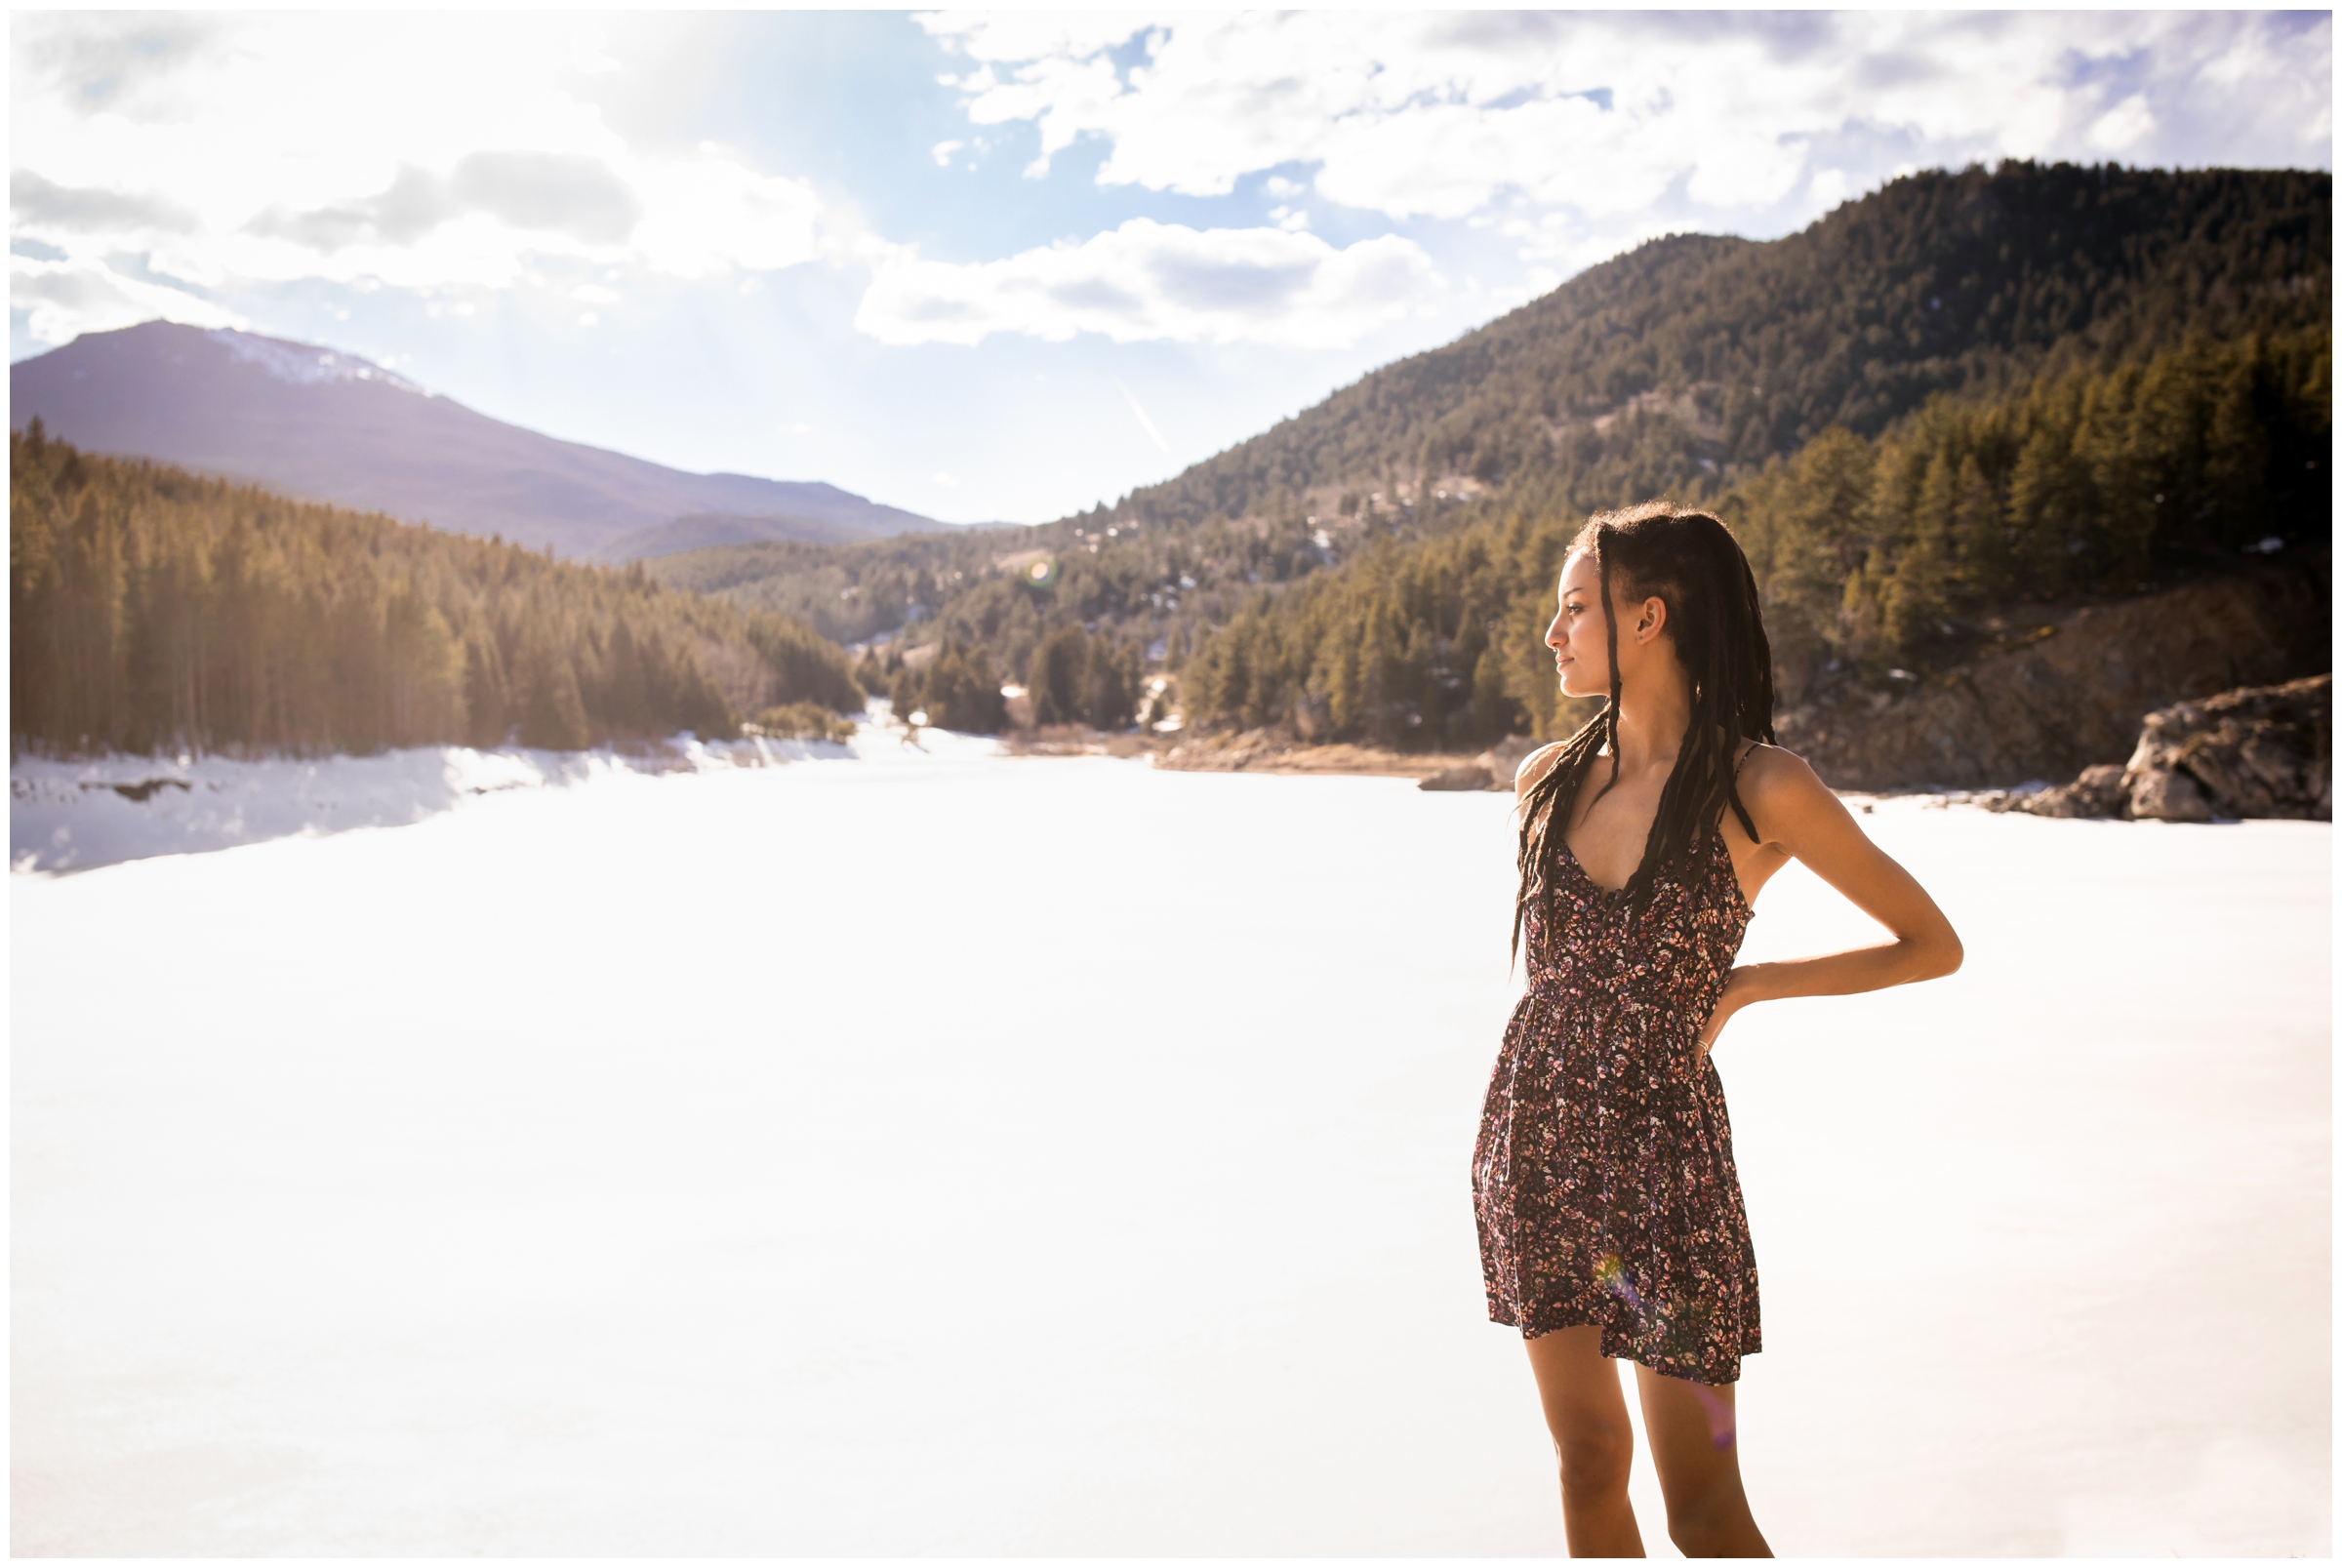 Graduation portraits during spring in the mountains of evergreen CO